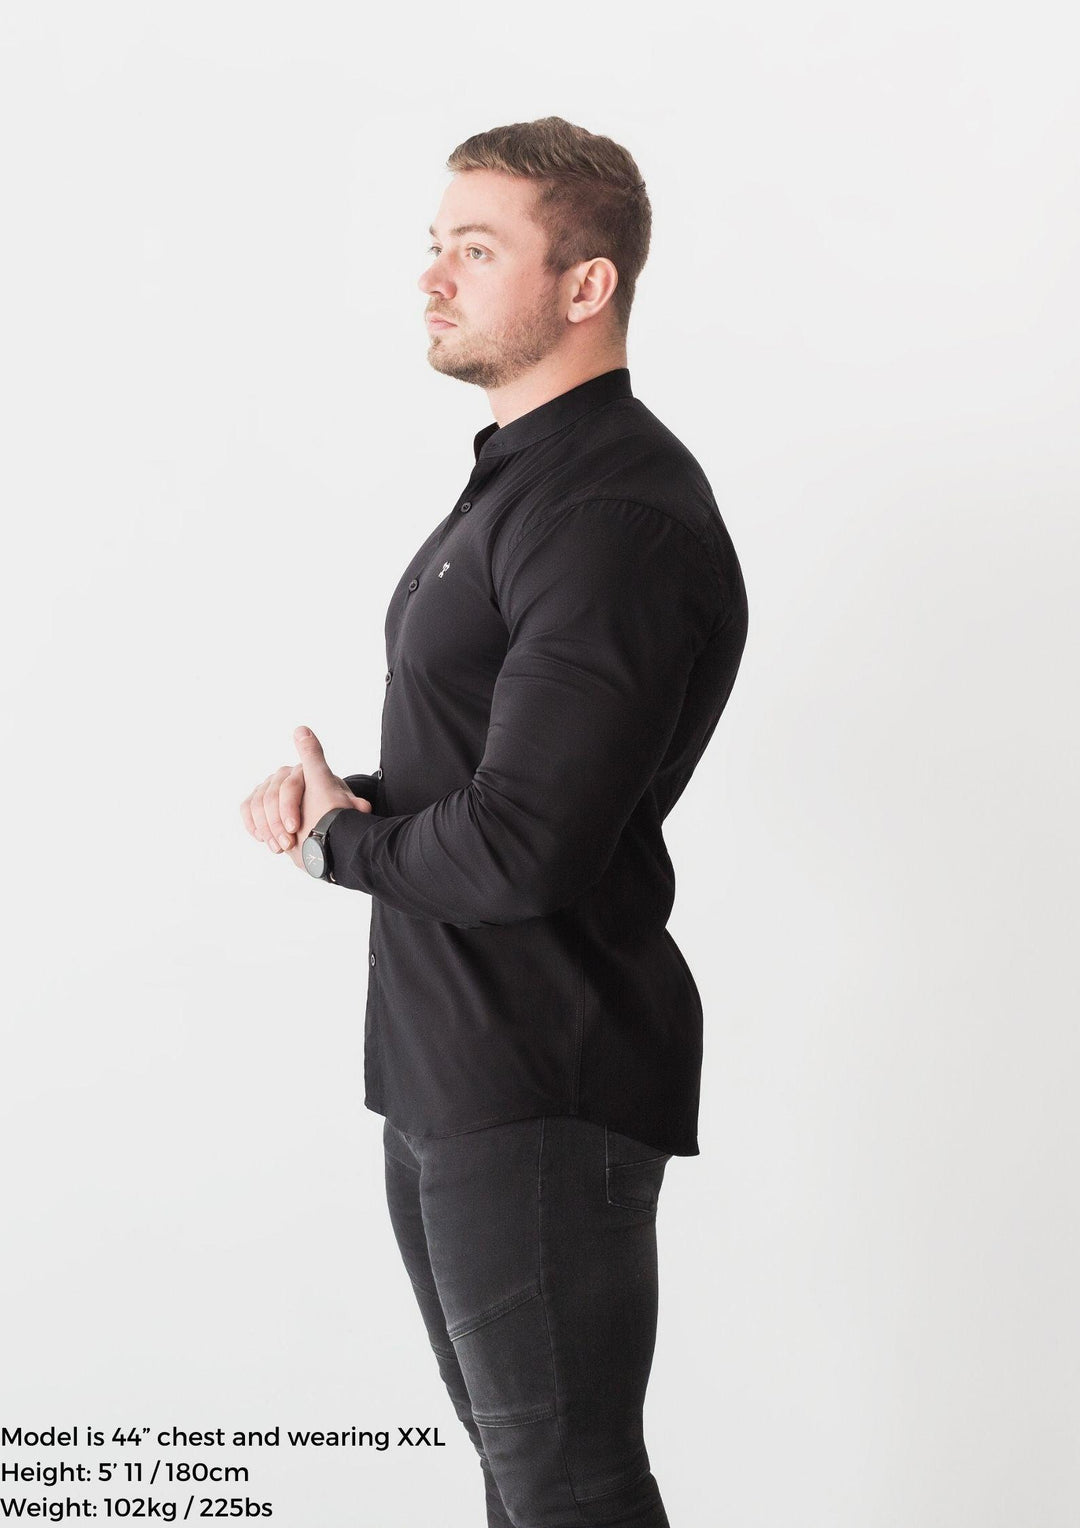 Grandad Collar Black Tapered Fit Shirt Side. A Proportionally Fitted and Comfortable Muscle Fit Shirt. Ideal for bodybuilders